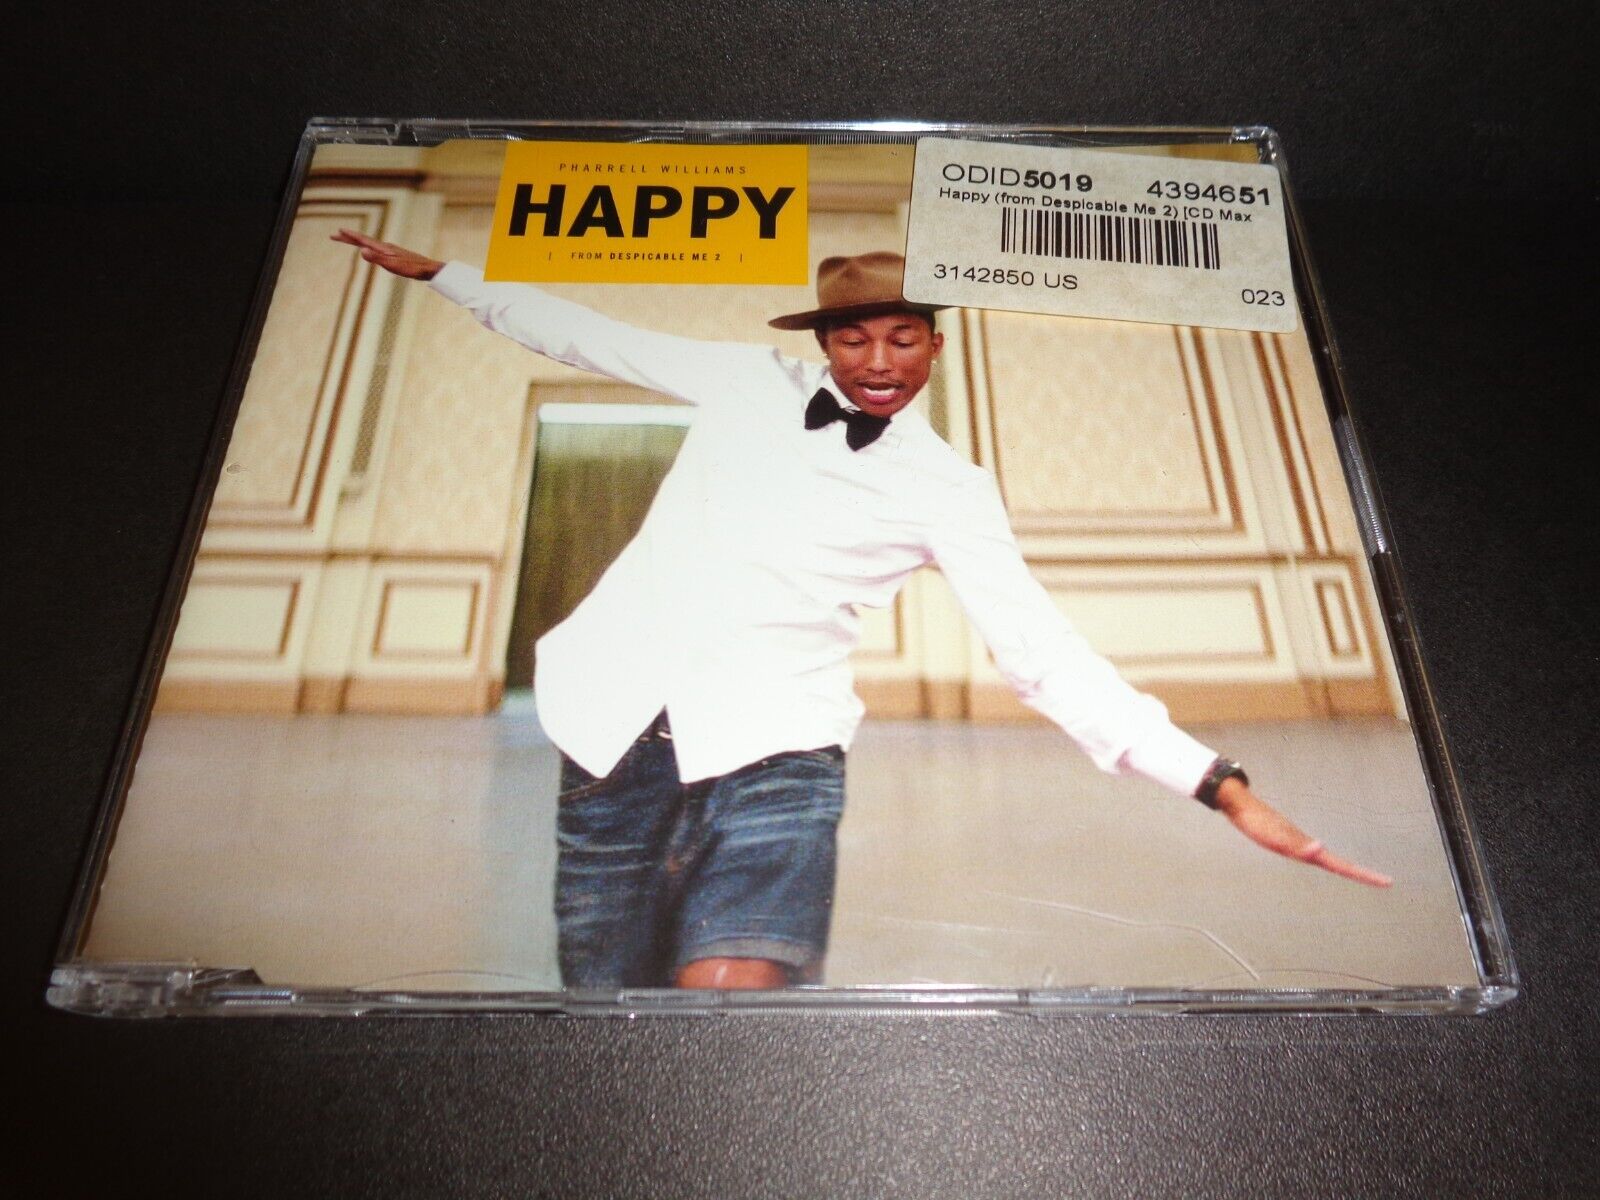 HAPPY by PHARRELL WILLIAMS-from Despicable Me 2-Rare Collectible CD Single--CD